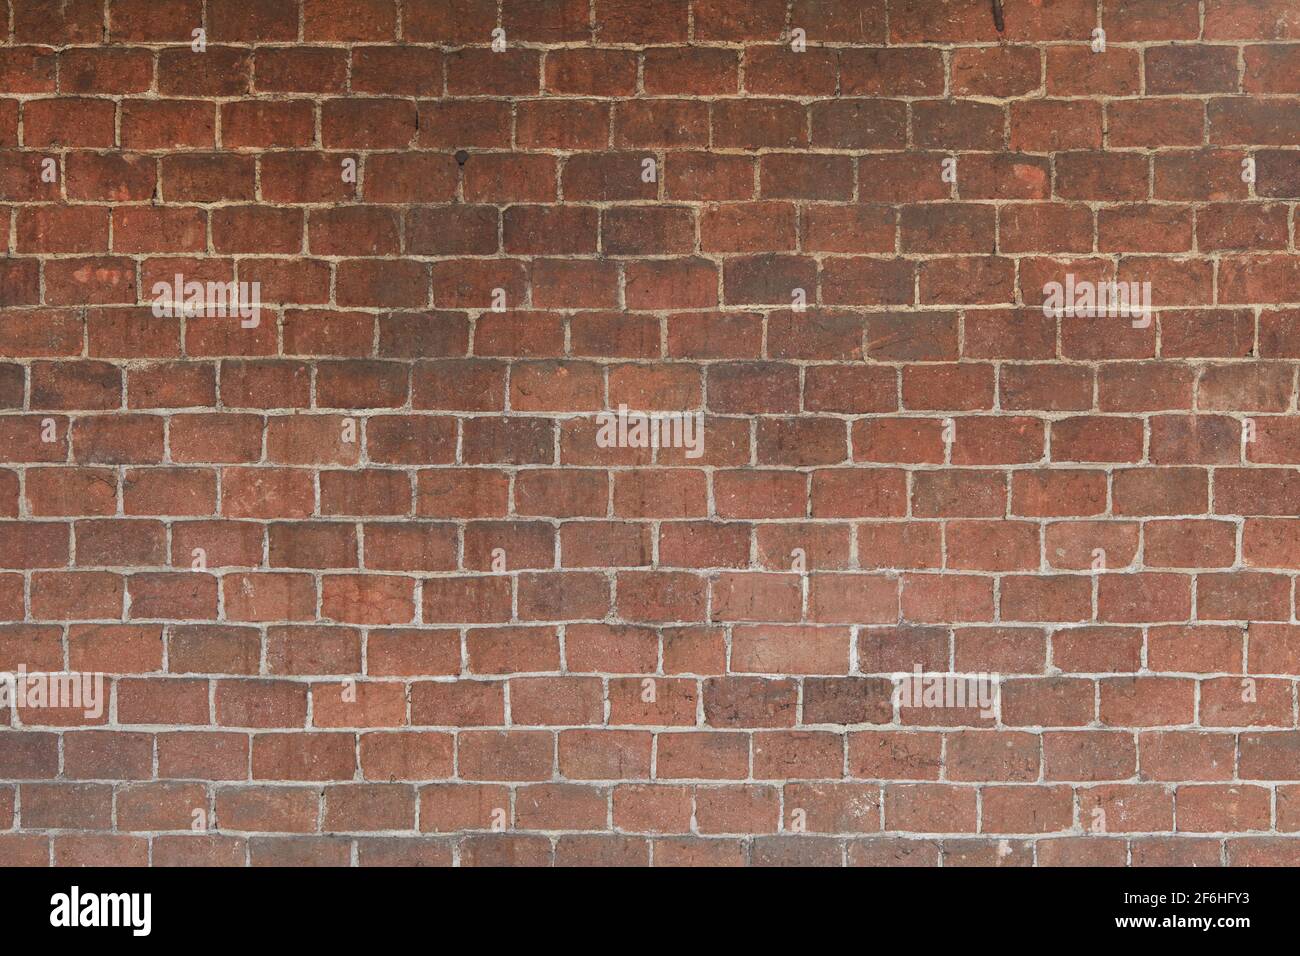 Brown, old brick wall texture background Stock Photo